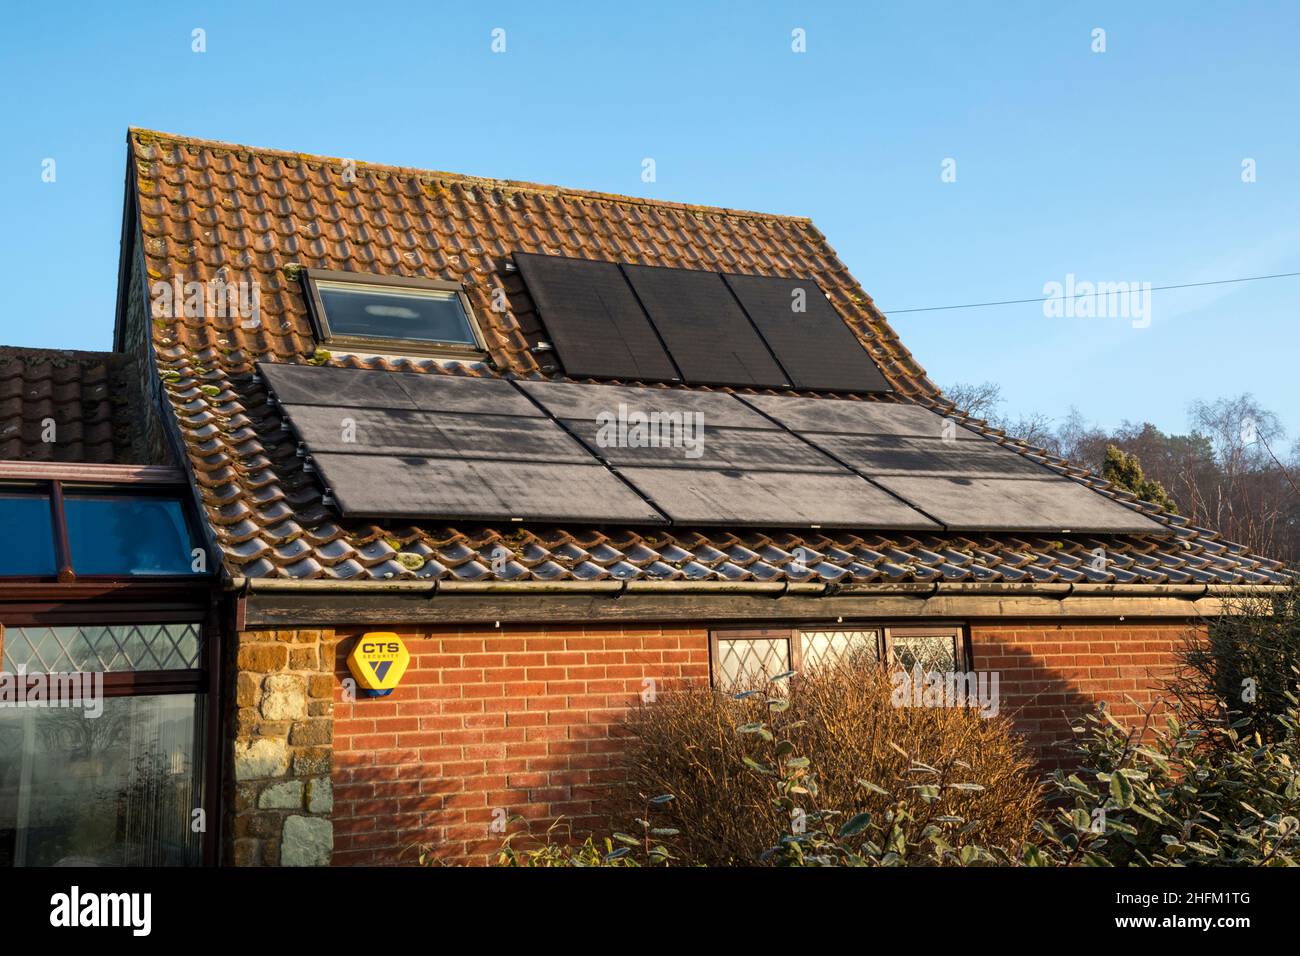 Frost on PV cells showing different sunlight levels at different inclinations to the sun. NB: The premises in the photograph are Property Released. Stock Photo